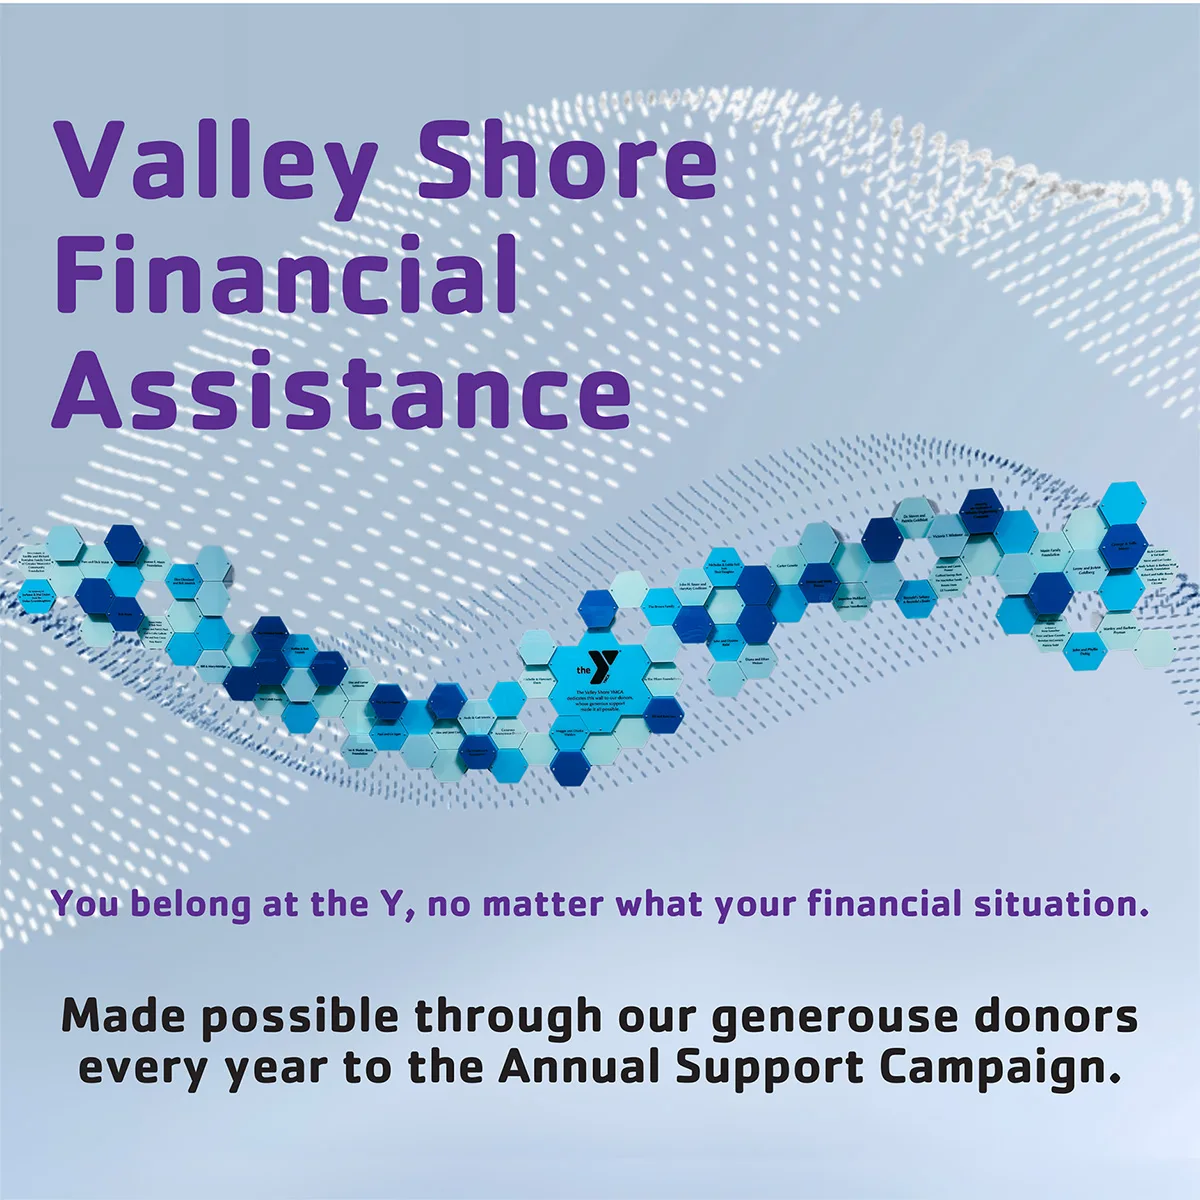 A text-based image displaying the words 'Valley Shore Financial Assistance', 'You belong at the Y, no matter what your financial situation. Made possible through our generous donors every year to the Annual Support Campaign.'